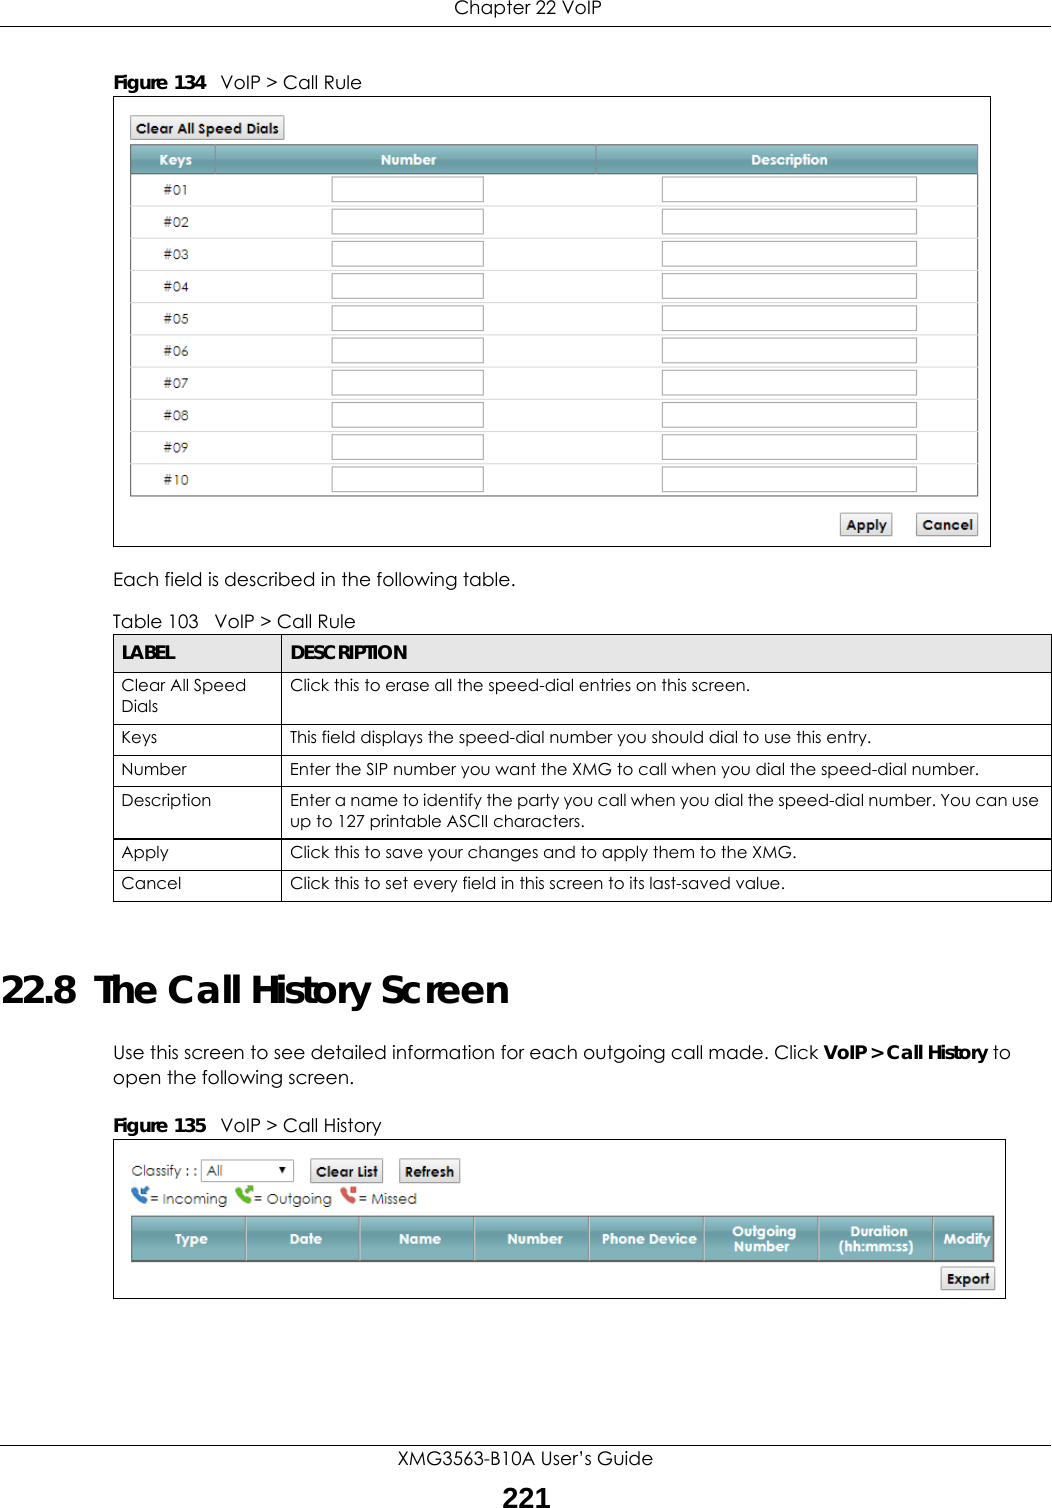  Chapter 22 VoIPXMG3563-B10A User’s Guide221Figure 134   VoIP &gt; Call RuleEach field is described in the following table.22.8  The Call History ScreenUse this screen to see detailed information for each outgoing call made. Click VoIP &gt; Call History to open the following screen.Figure 135   VoIP &gt; Call HistoryTable 103   VoIP &gt; Call RuleLABEL DESCRIPTIONClear All Speed DialsClick this to erase all the speed-dial entries on this screen.Keys This field displays the speed-dial number you should dial to use this entry.Number Enter the SIP number you want the XMG to call when you dial the speed-dial number.Description Enter a name to identify the party you call when you dial the speed-dial number. You can use up to 127 printable ASCII characters.Apply Click this to save your changes and to apply them to the XMG.Cancel Click this to set every field in this screen to its last-saved value.